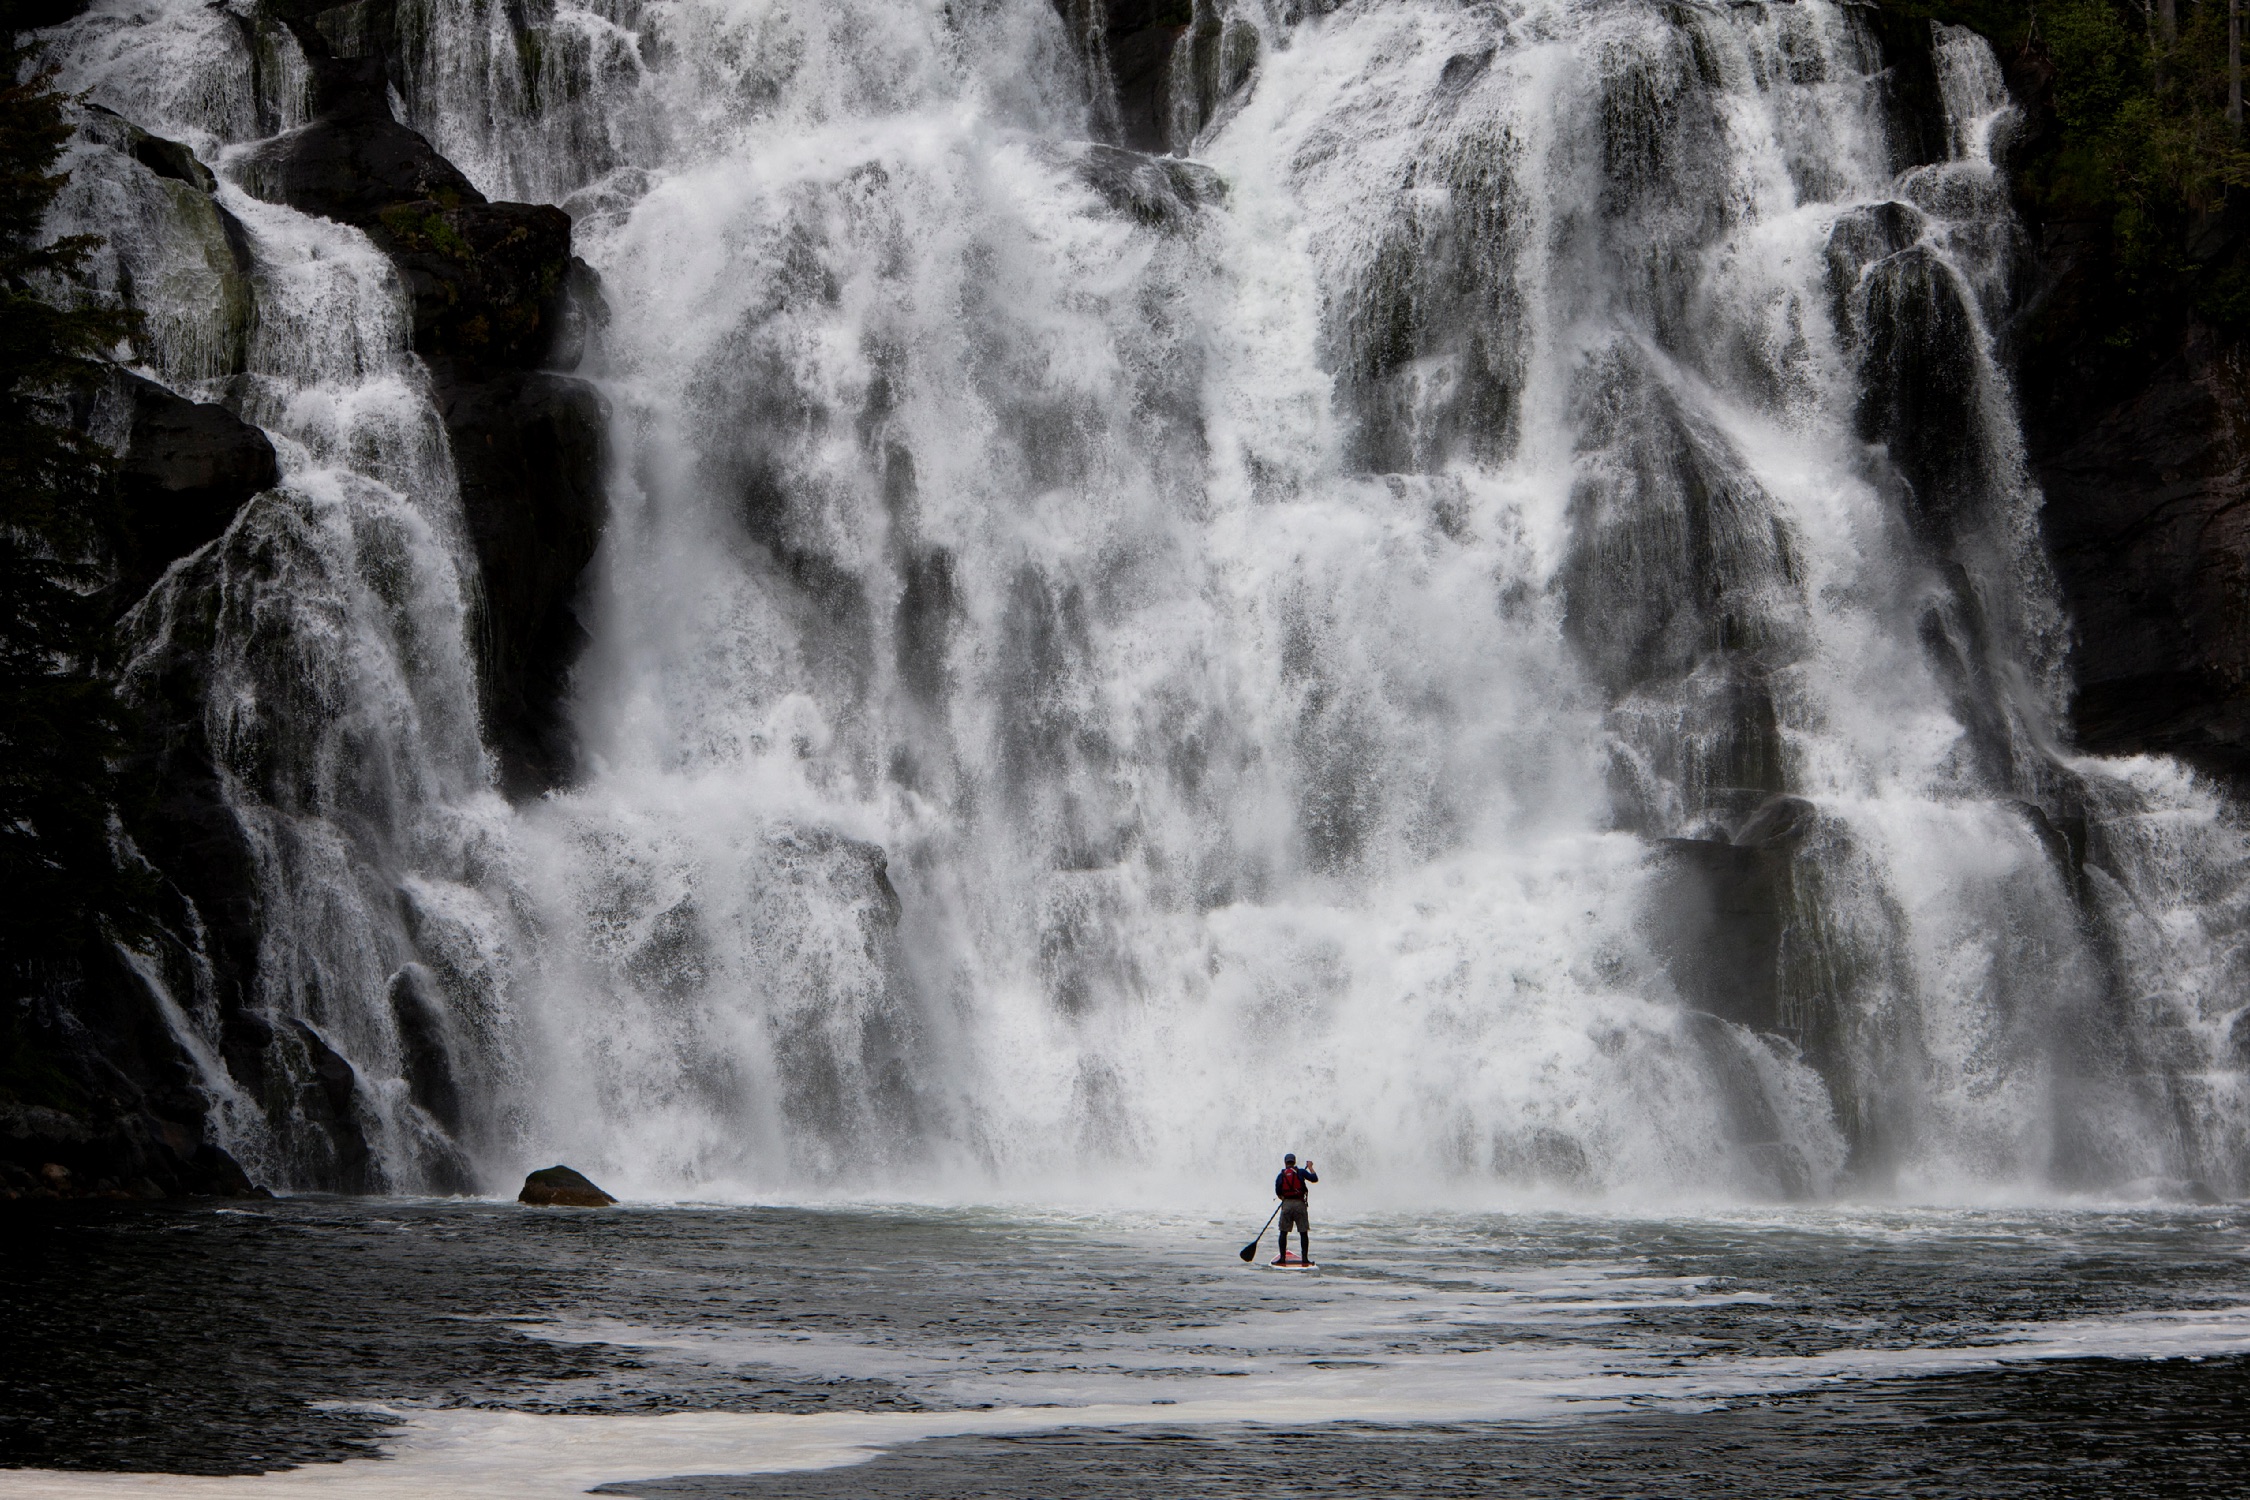 Man in the distance paddleboarding towards a cascading waterfall